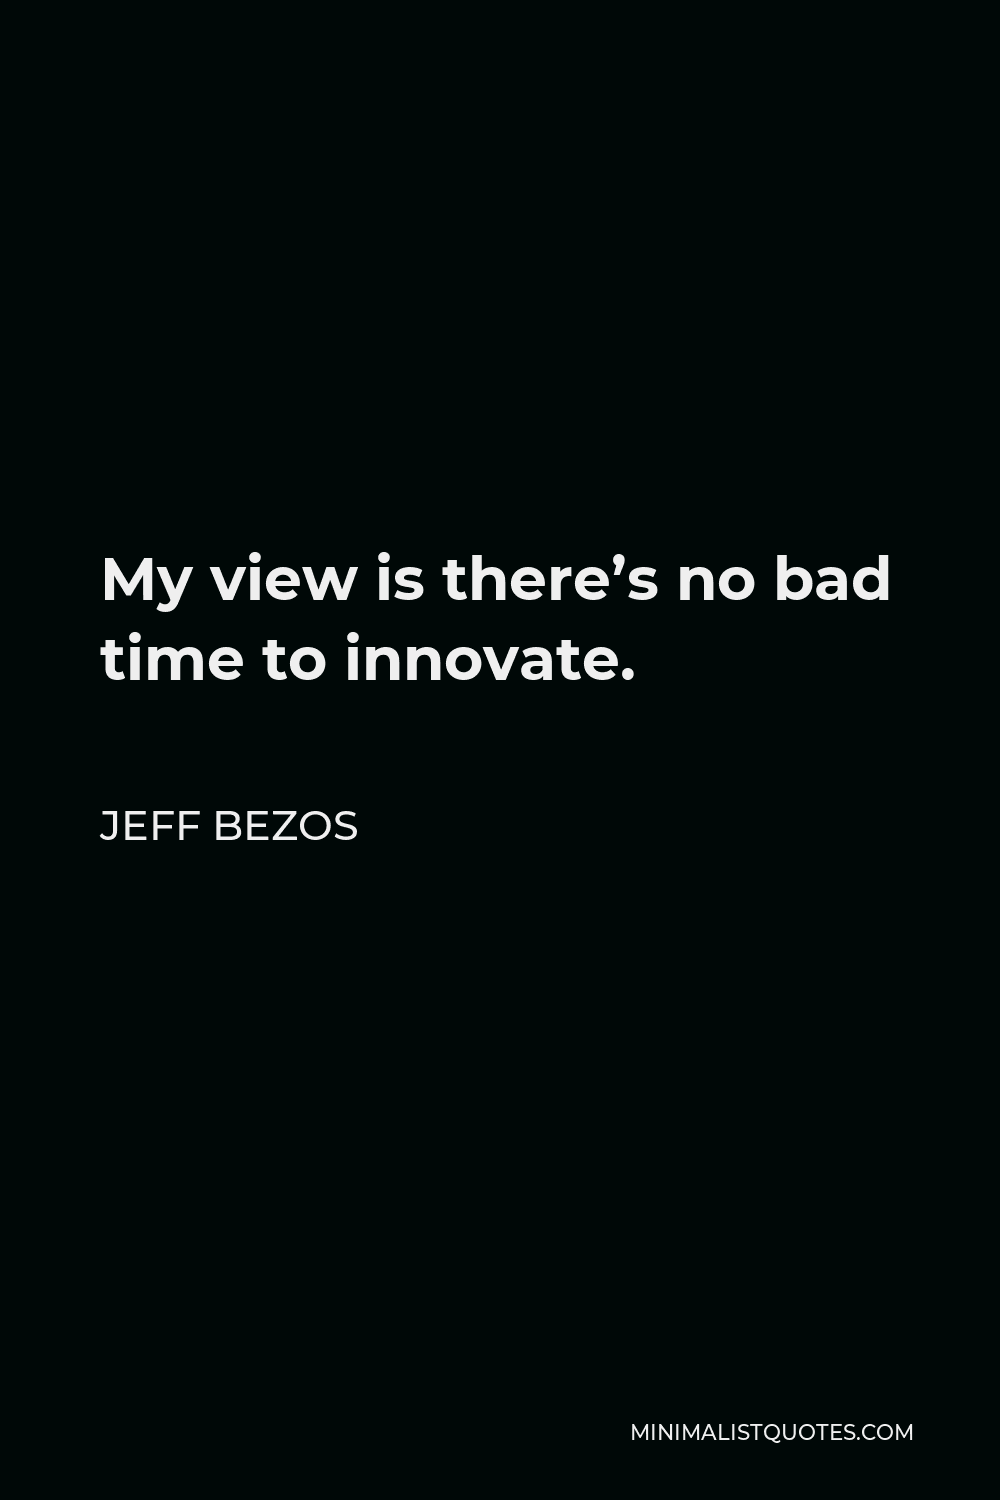 Jeff Bezos Quote - My view is there’s no bad time to innovate.